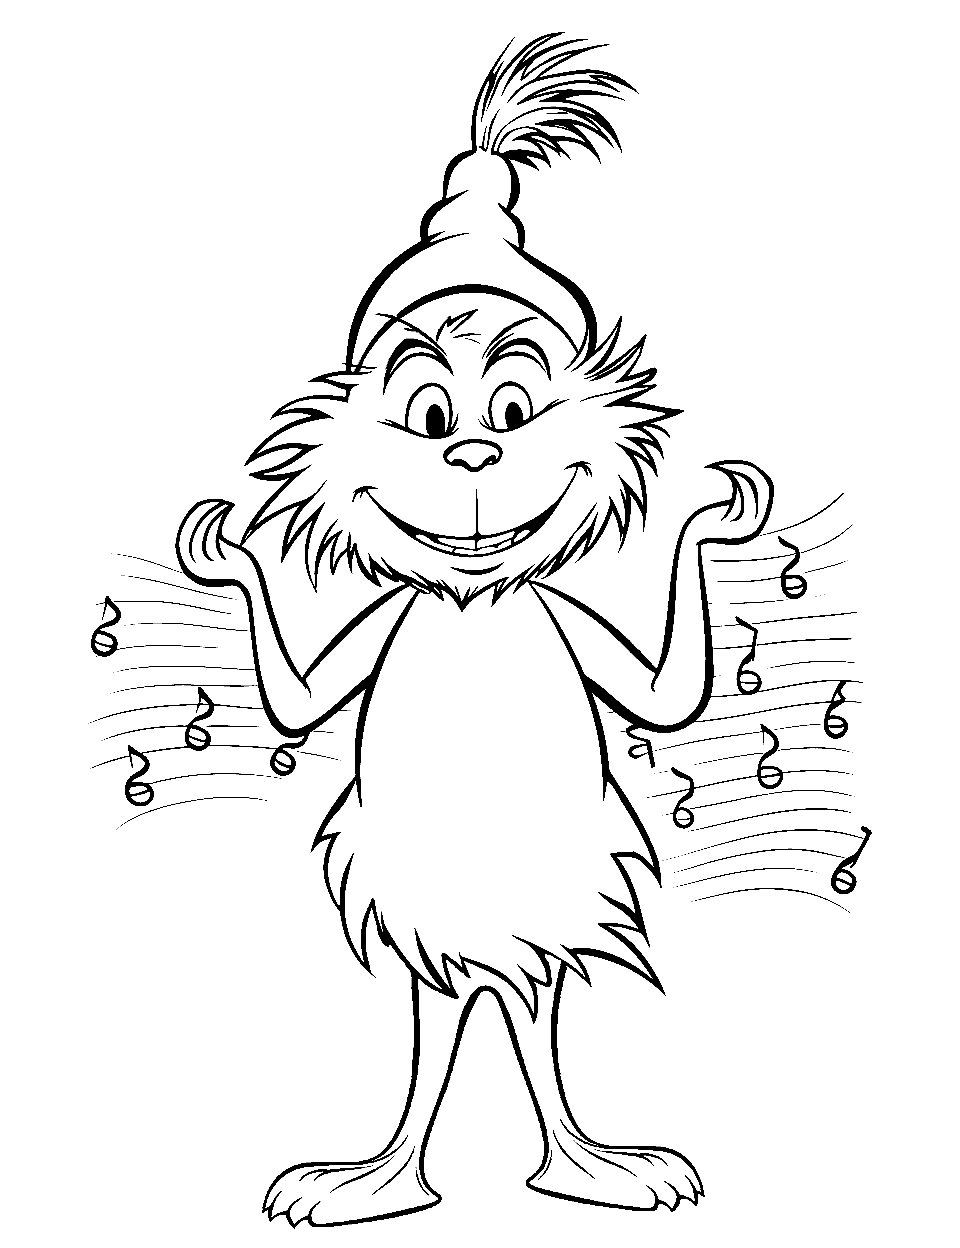 Grinch Singing Coloring Page - The Grinch is singing and musical notes floating and flying around.